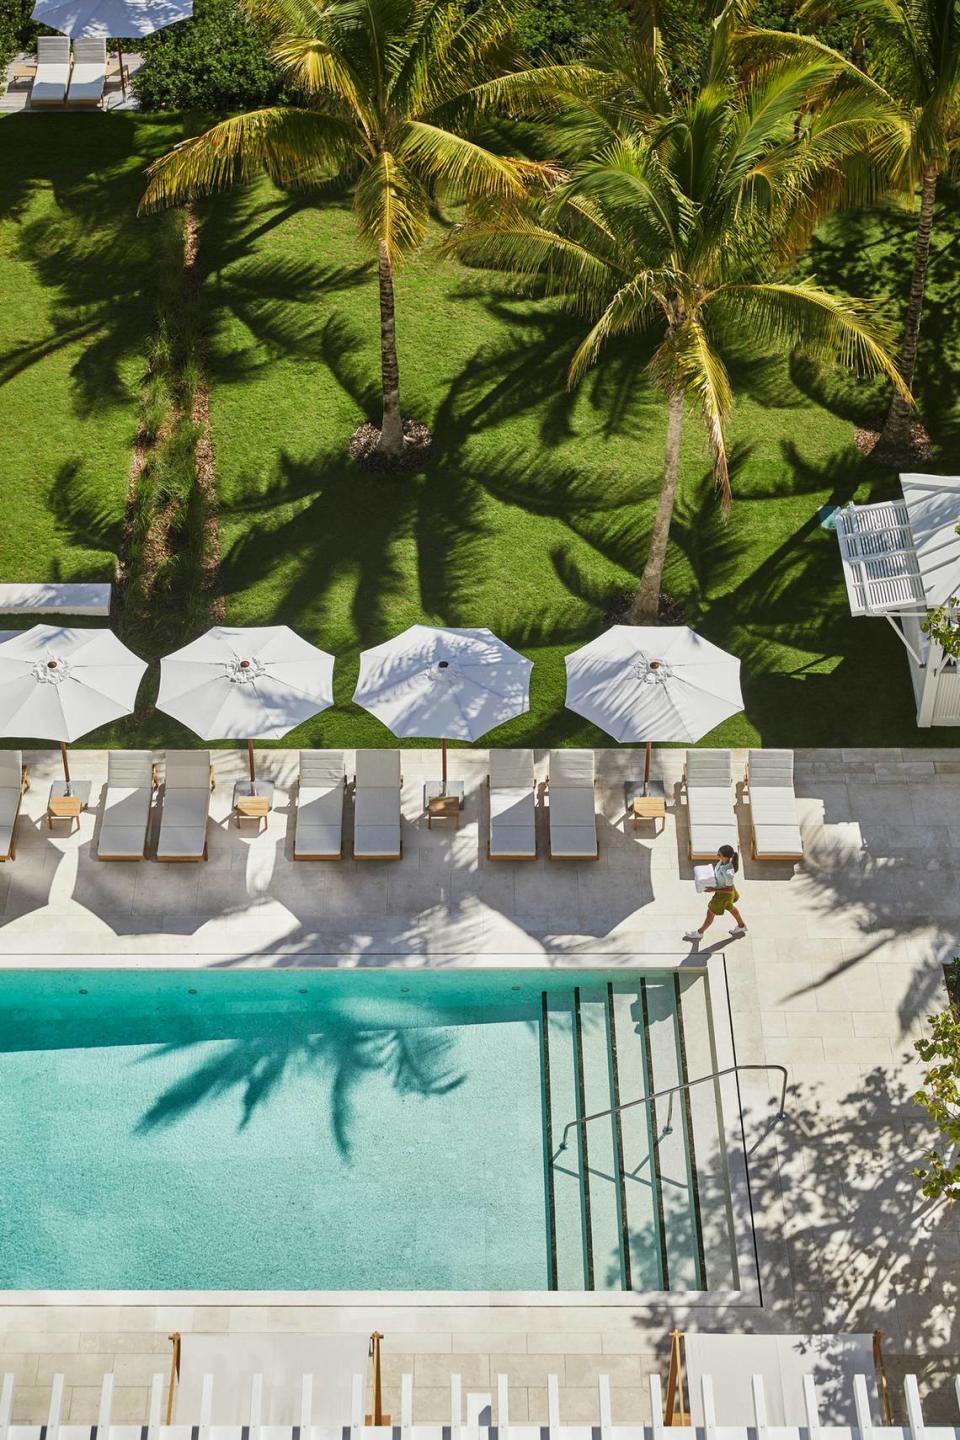 The Four Seasons Hotel at The Surf Club stands out as one of Miami’s most glamorous and historic resorts. 